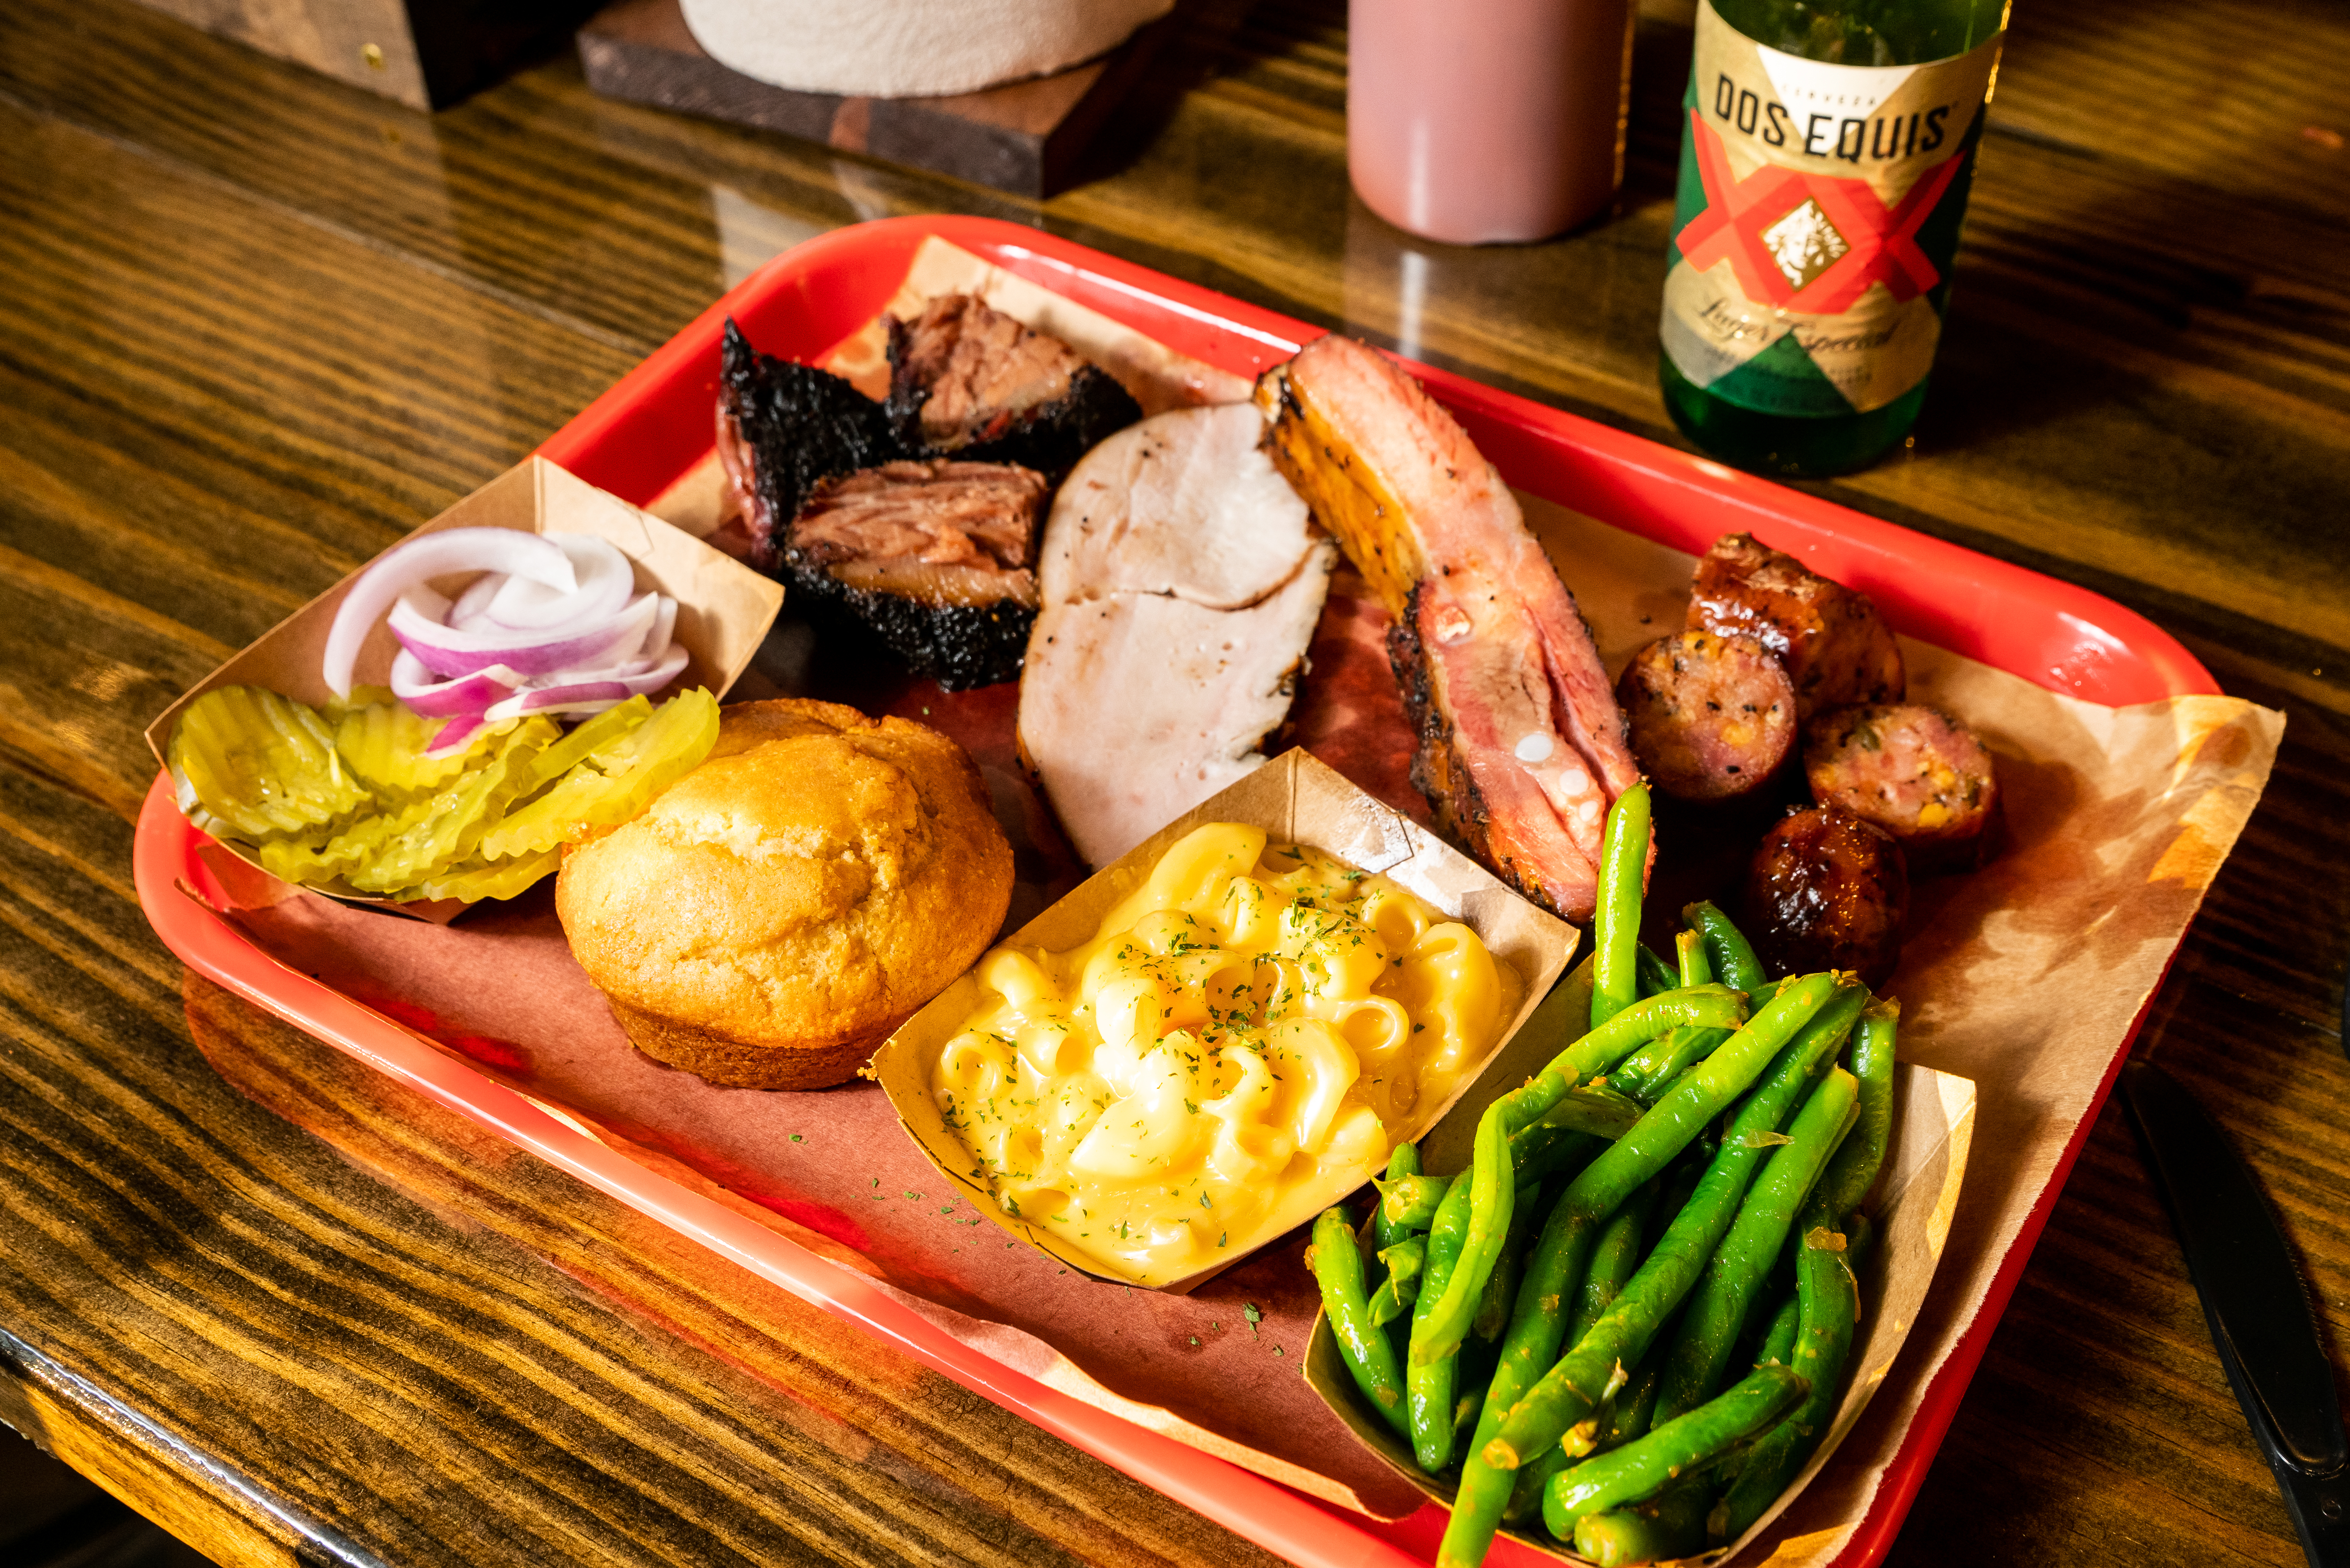 A tray of barbecue meats and sides.